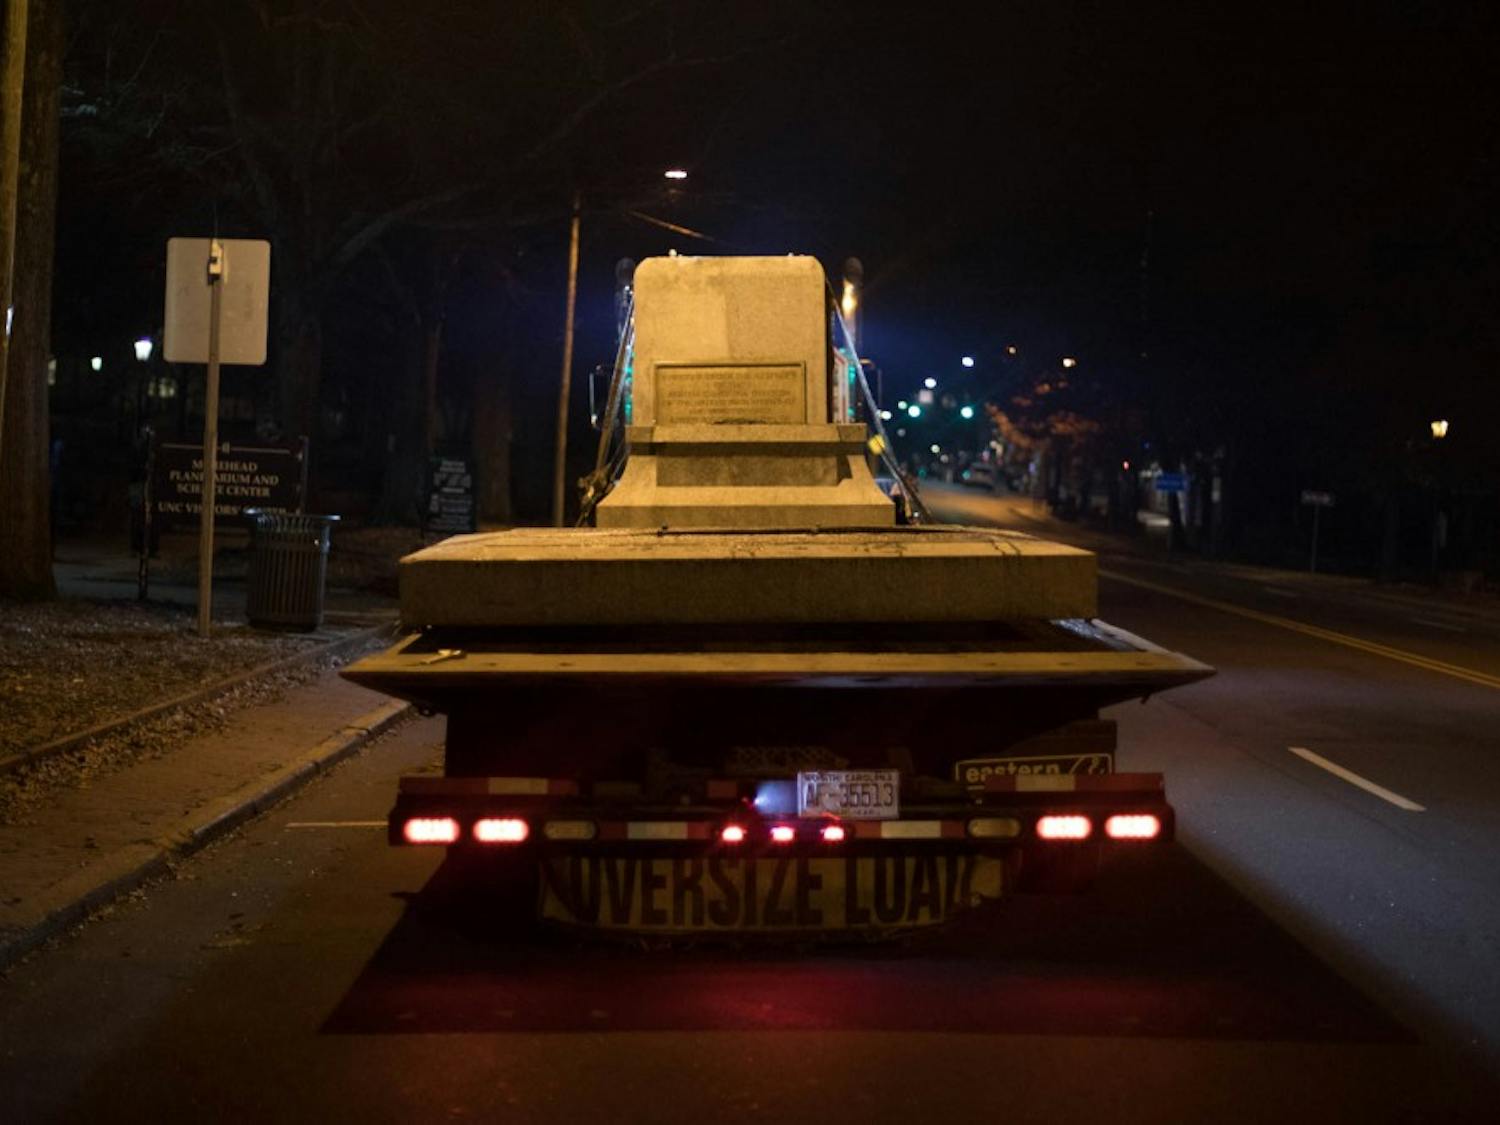 Workers remove the base of Silent Sam, which stood on the campus of UNC-CH for over 100 years, the night of Tuesday, Jan. 14, 2019. The removal of the pedestal came hours after Chancellor Carol Folt announced the removal and her resignation after spring graduation.